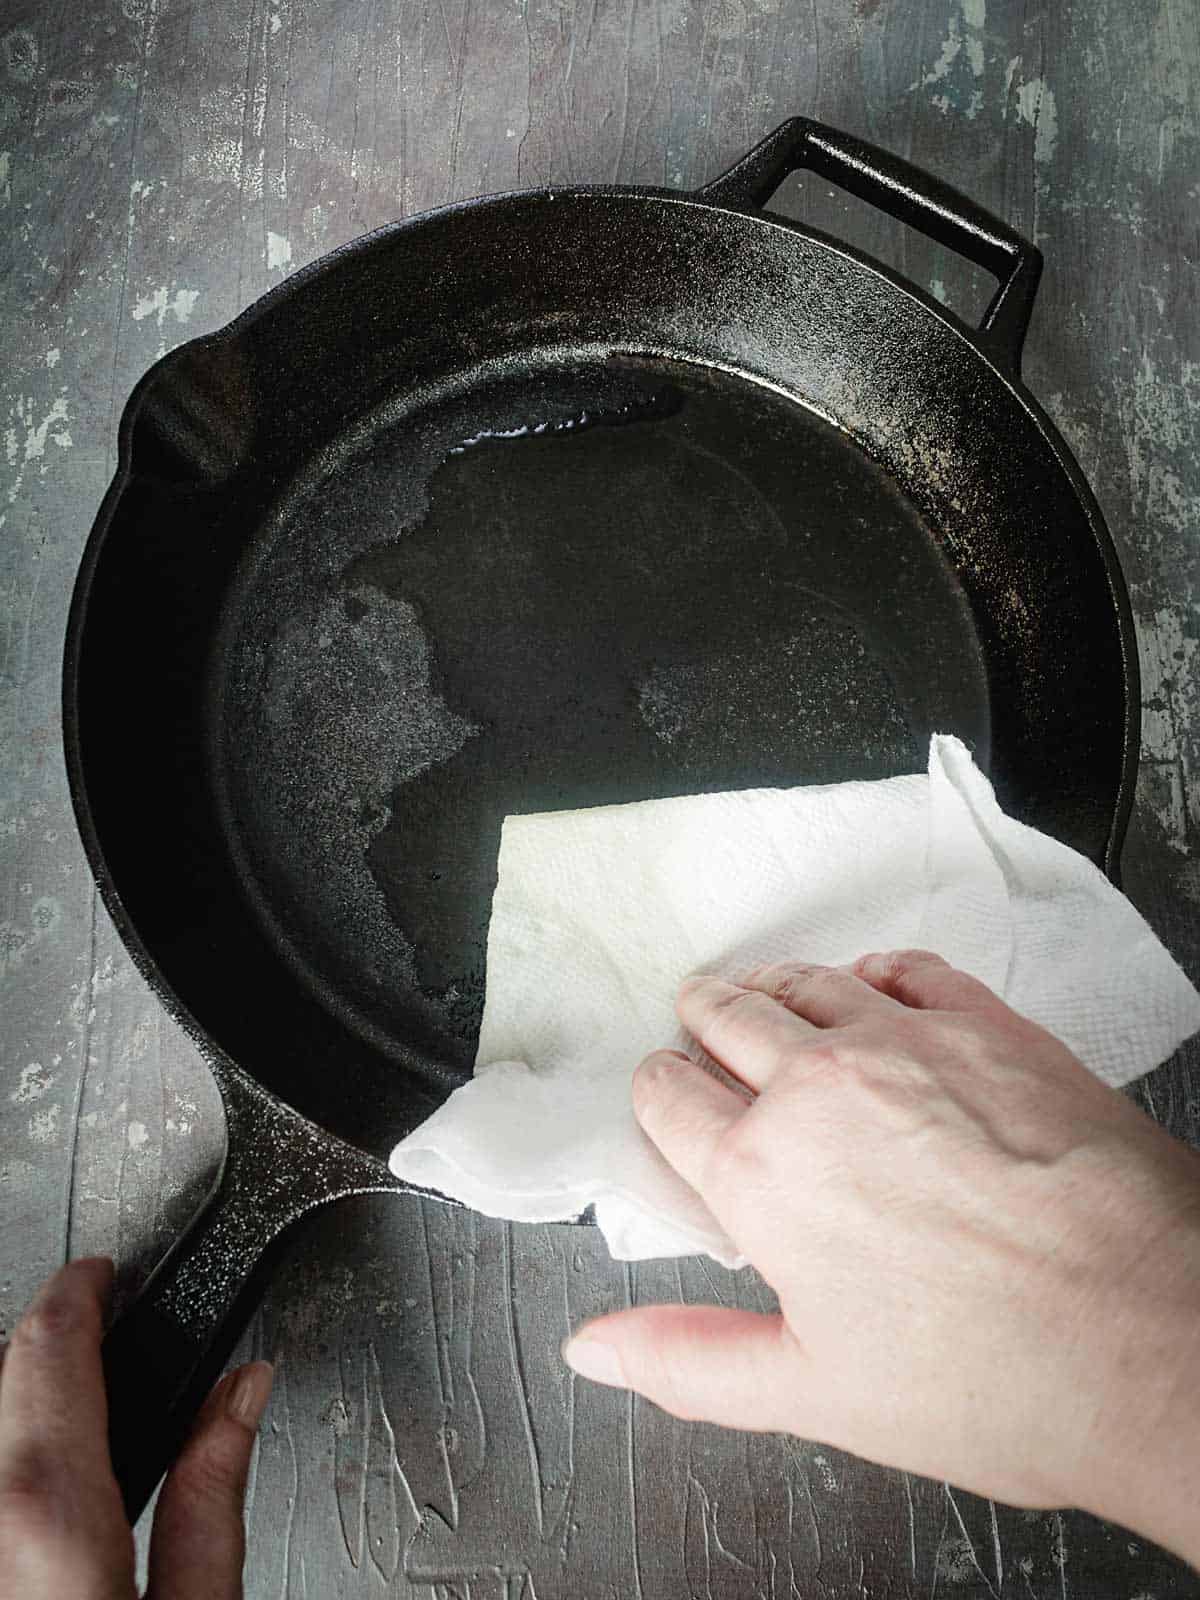 Rubbing oil on the cast-iron pan with paper towel.